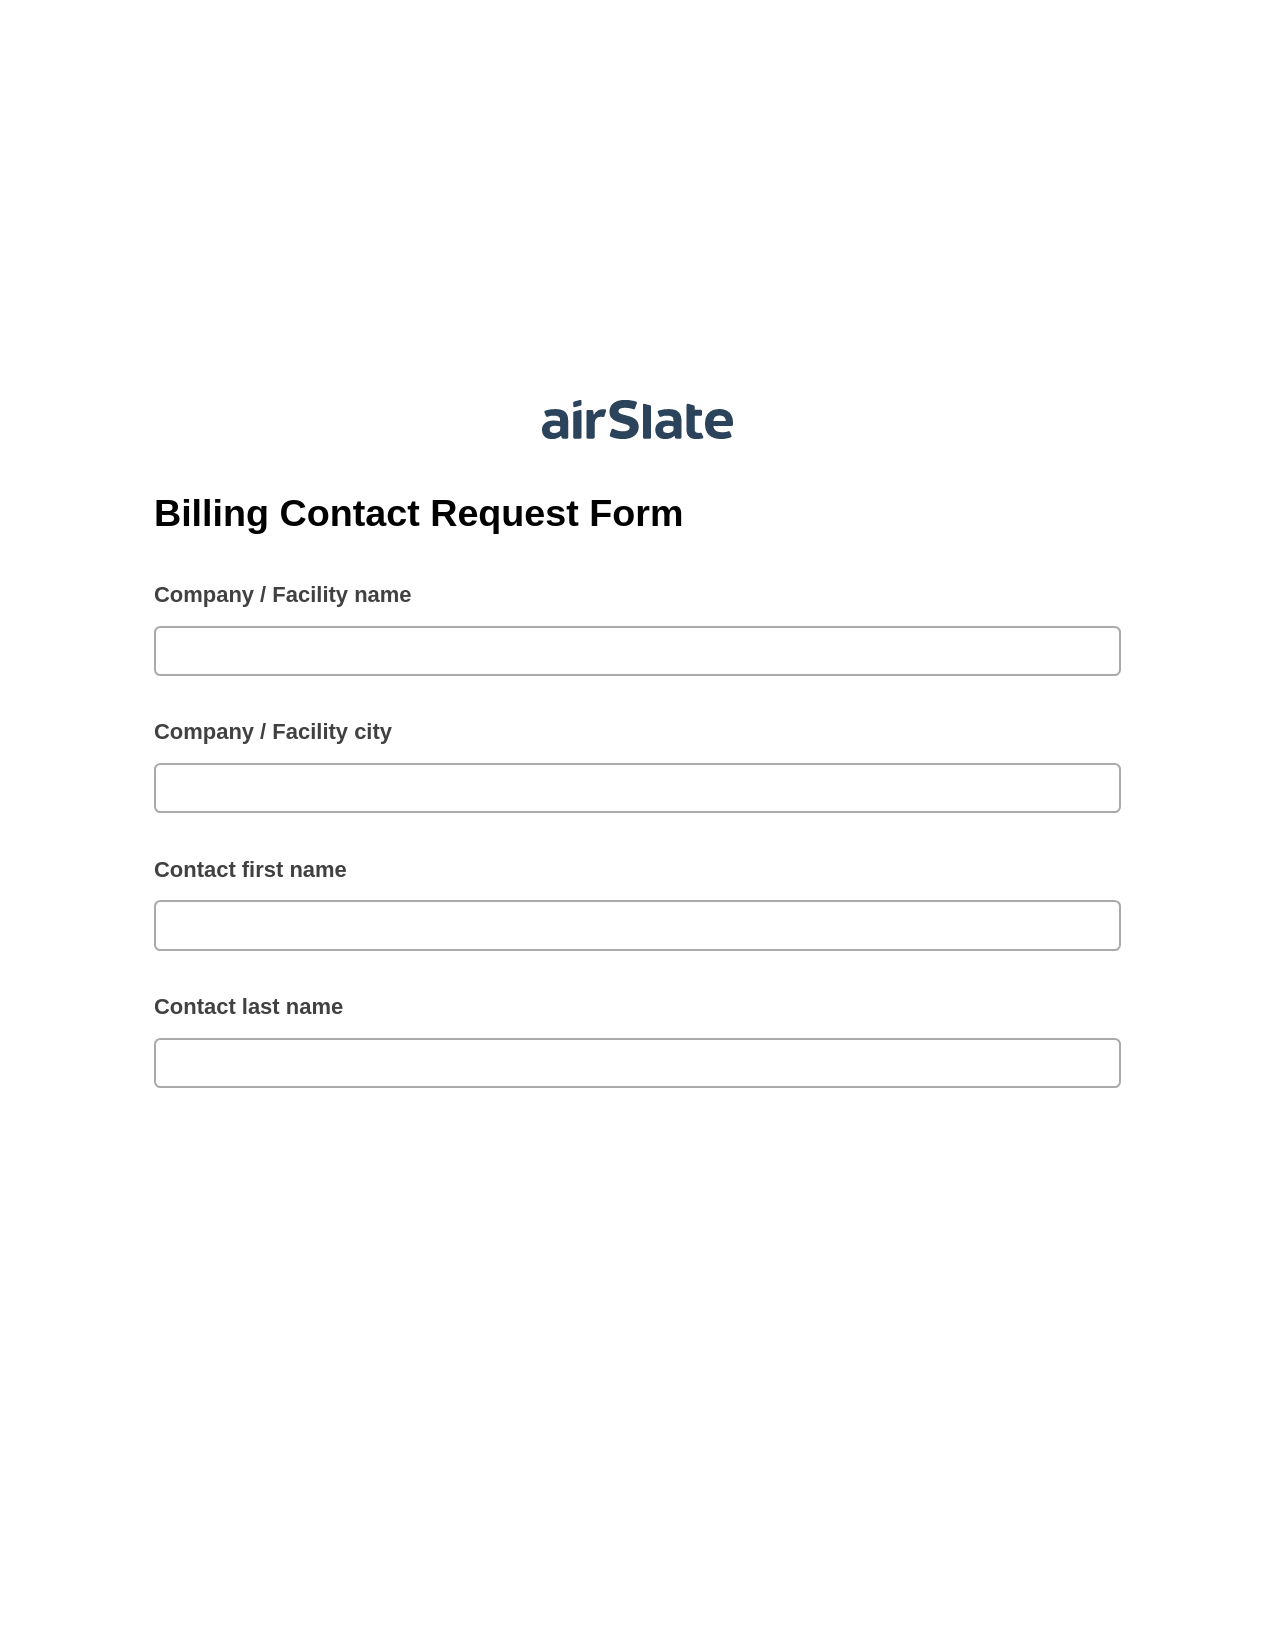 Multirole Billing Contact Request Form Pre-fill Dropdowns from MySQL Bot, Set Signature Type Bot, Export to Smartsheet